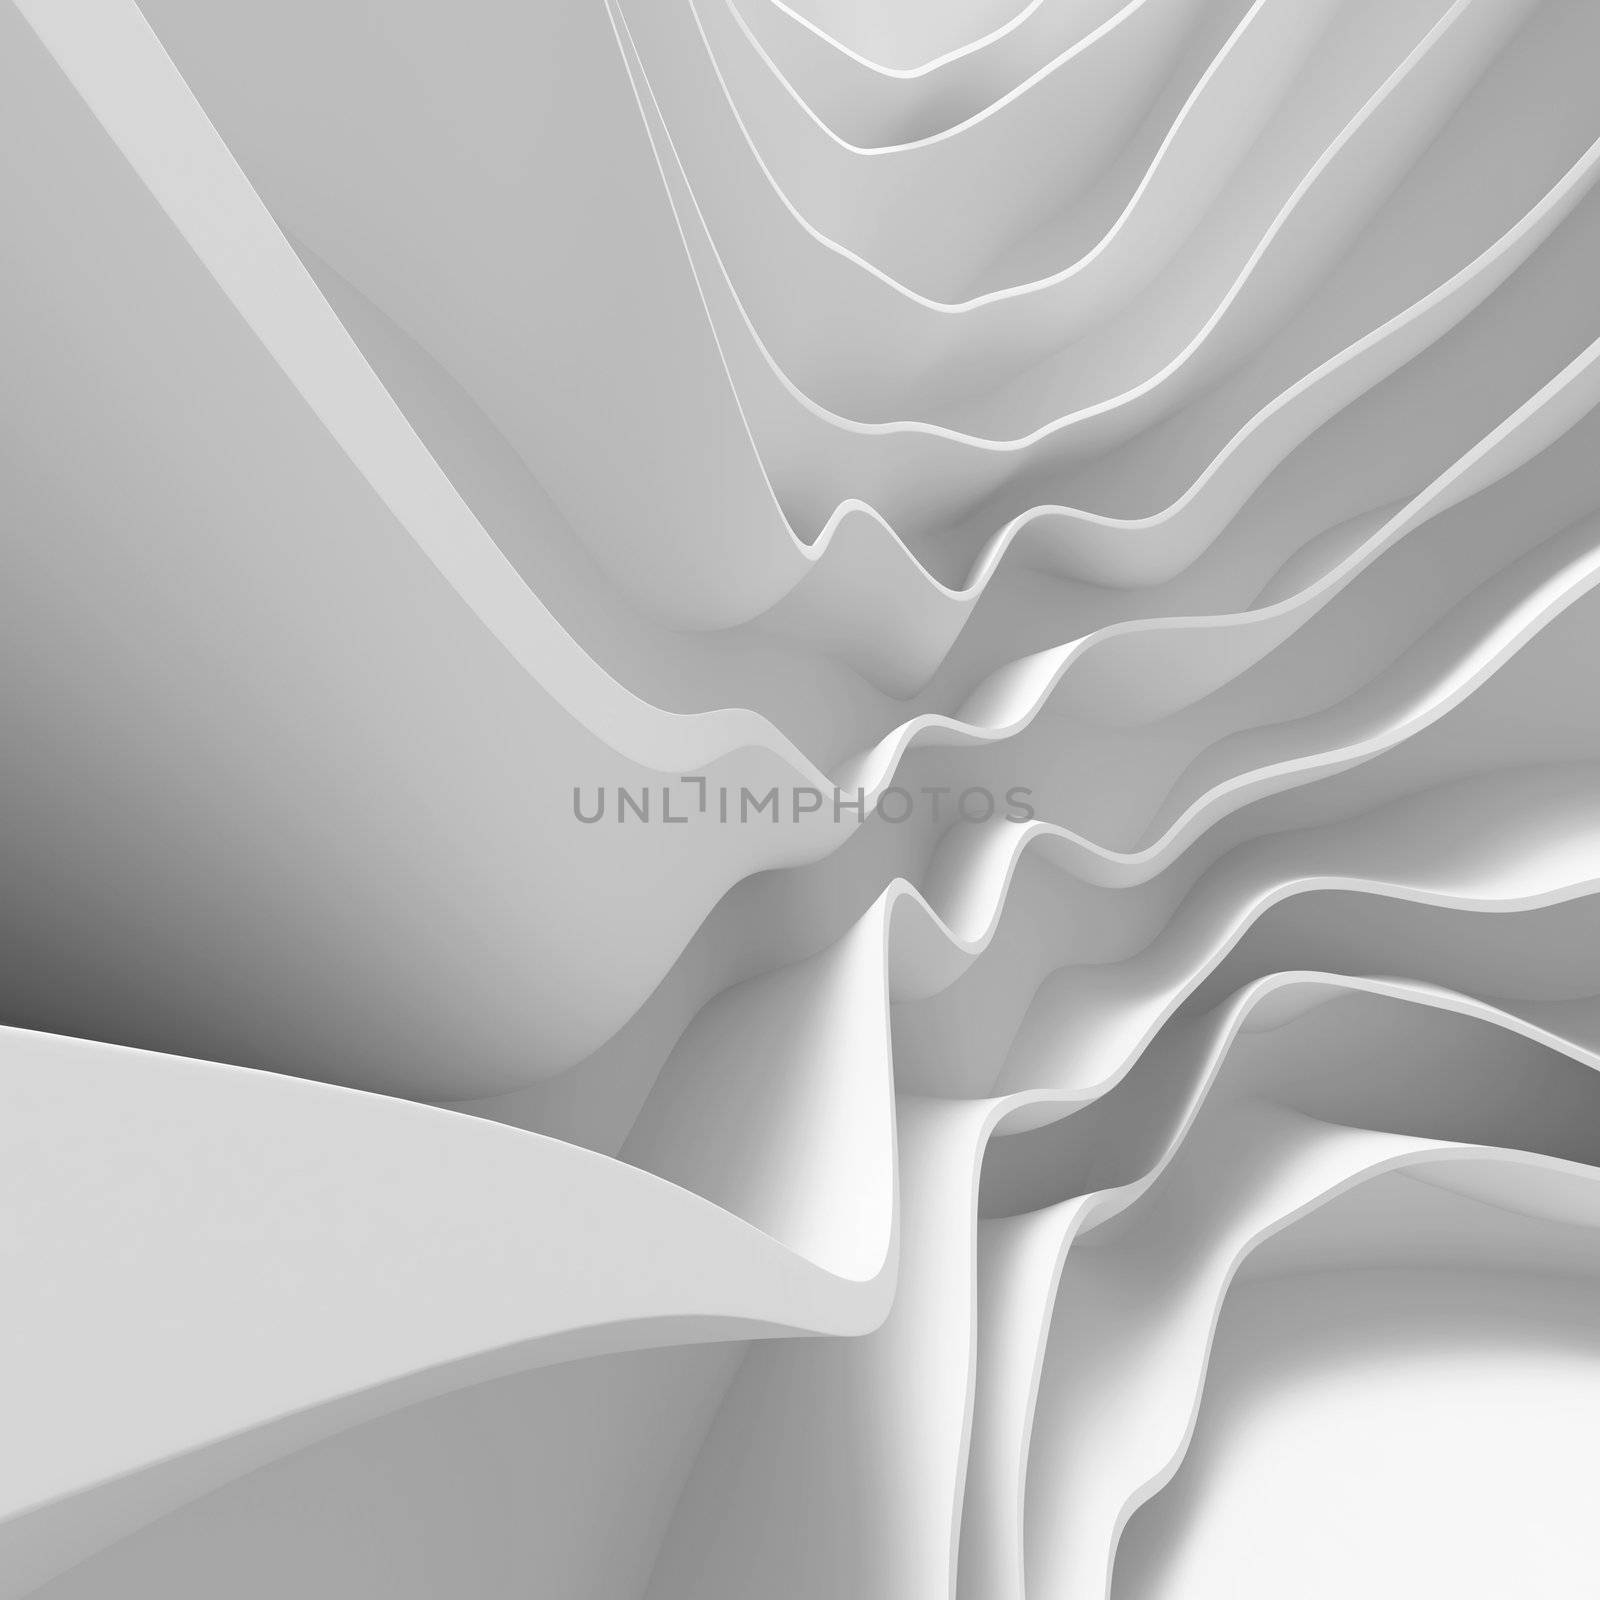 3d Illustration of White Abstract Architecture Wallpaper